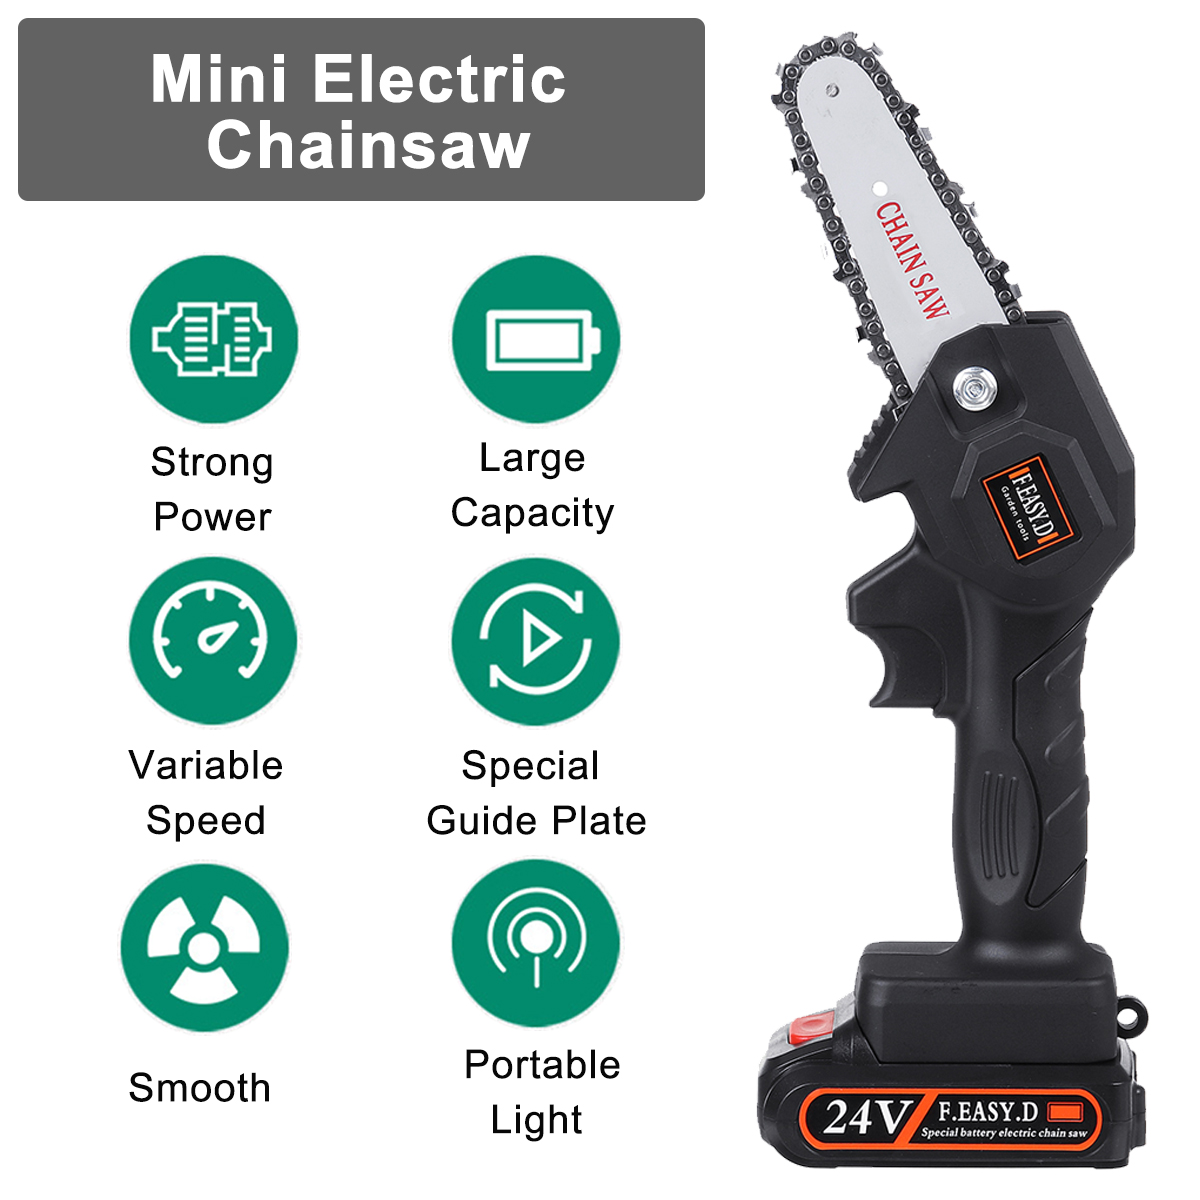 24V-550W-Rechargeable-Mini-Electric-Chainsaw-Handheld-Wood-Pruning-Saw-Kit-1776999-2